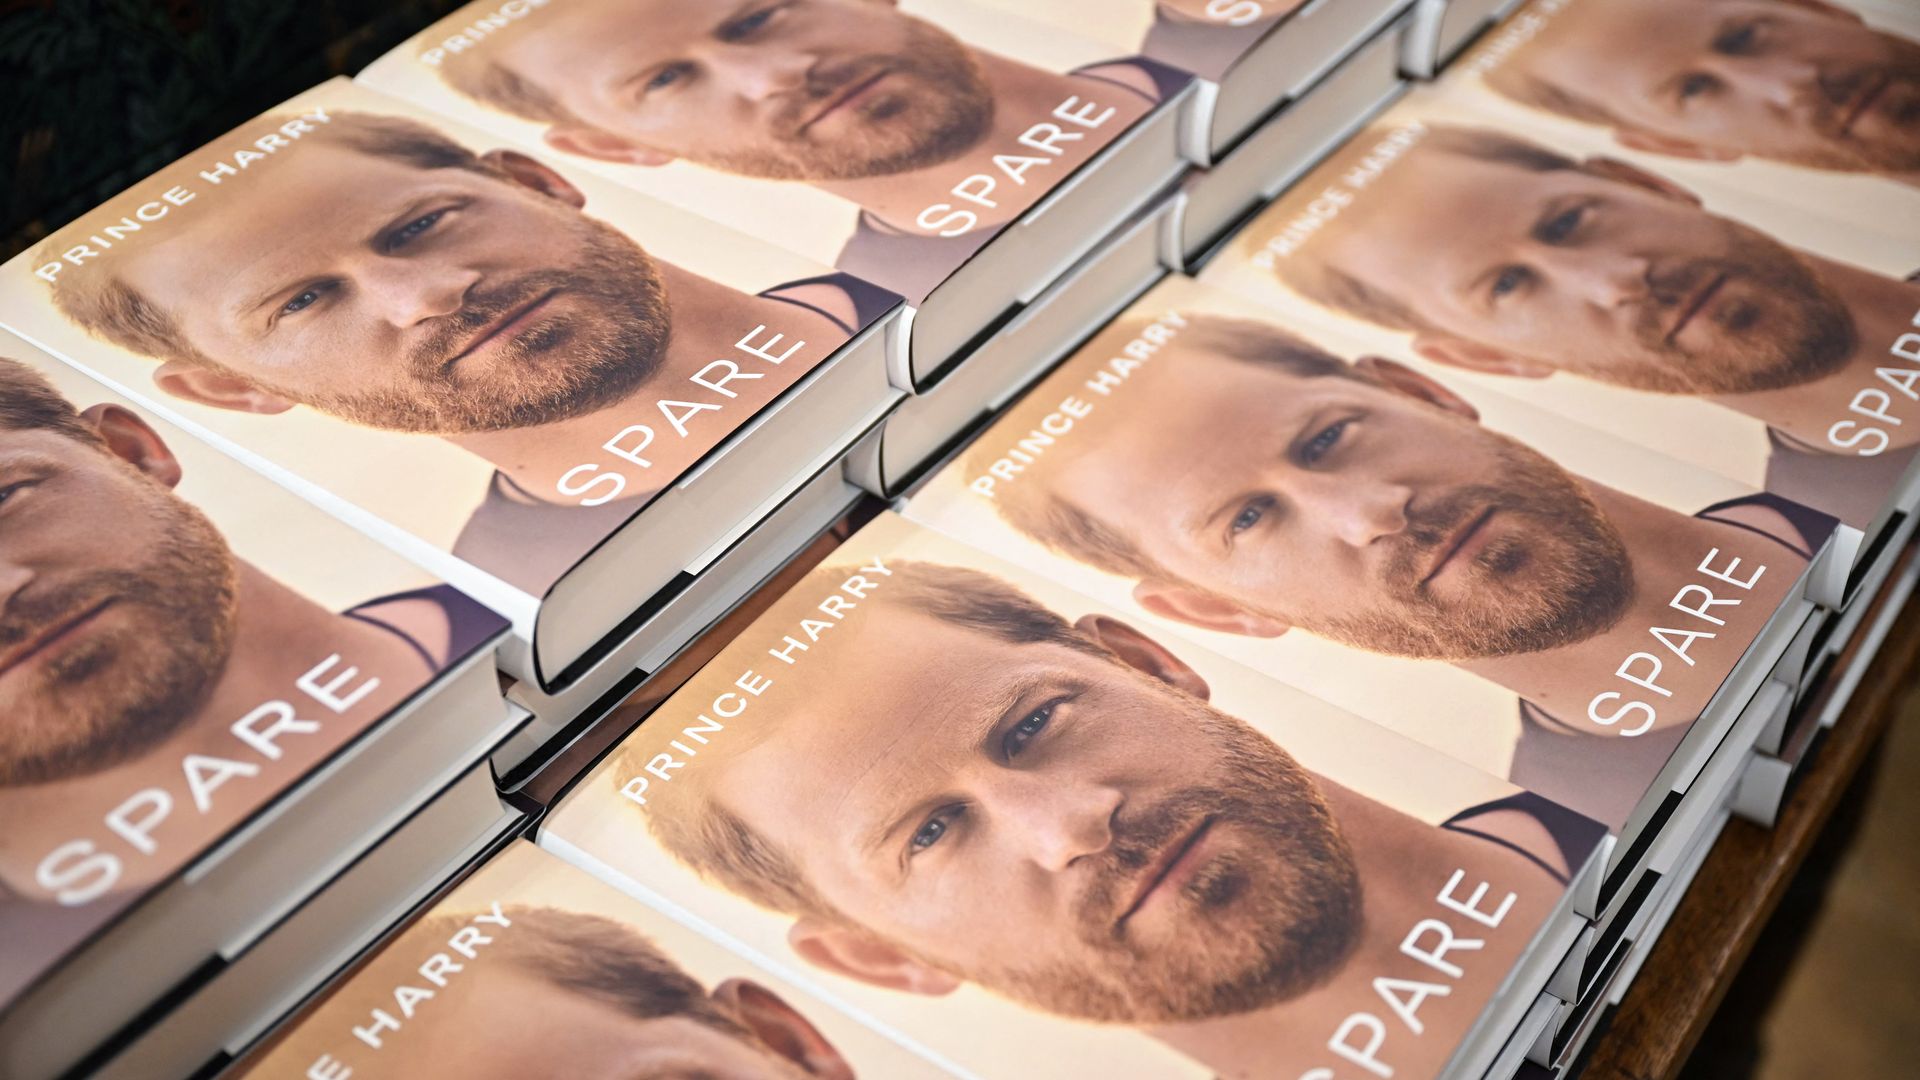 A photo of Prince Harry's book.